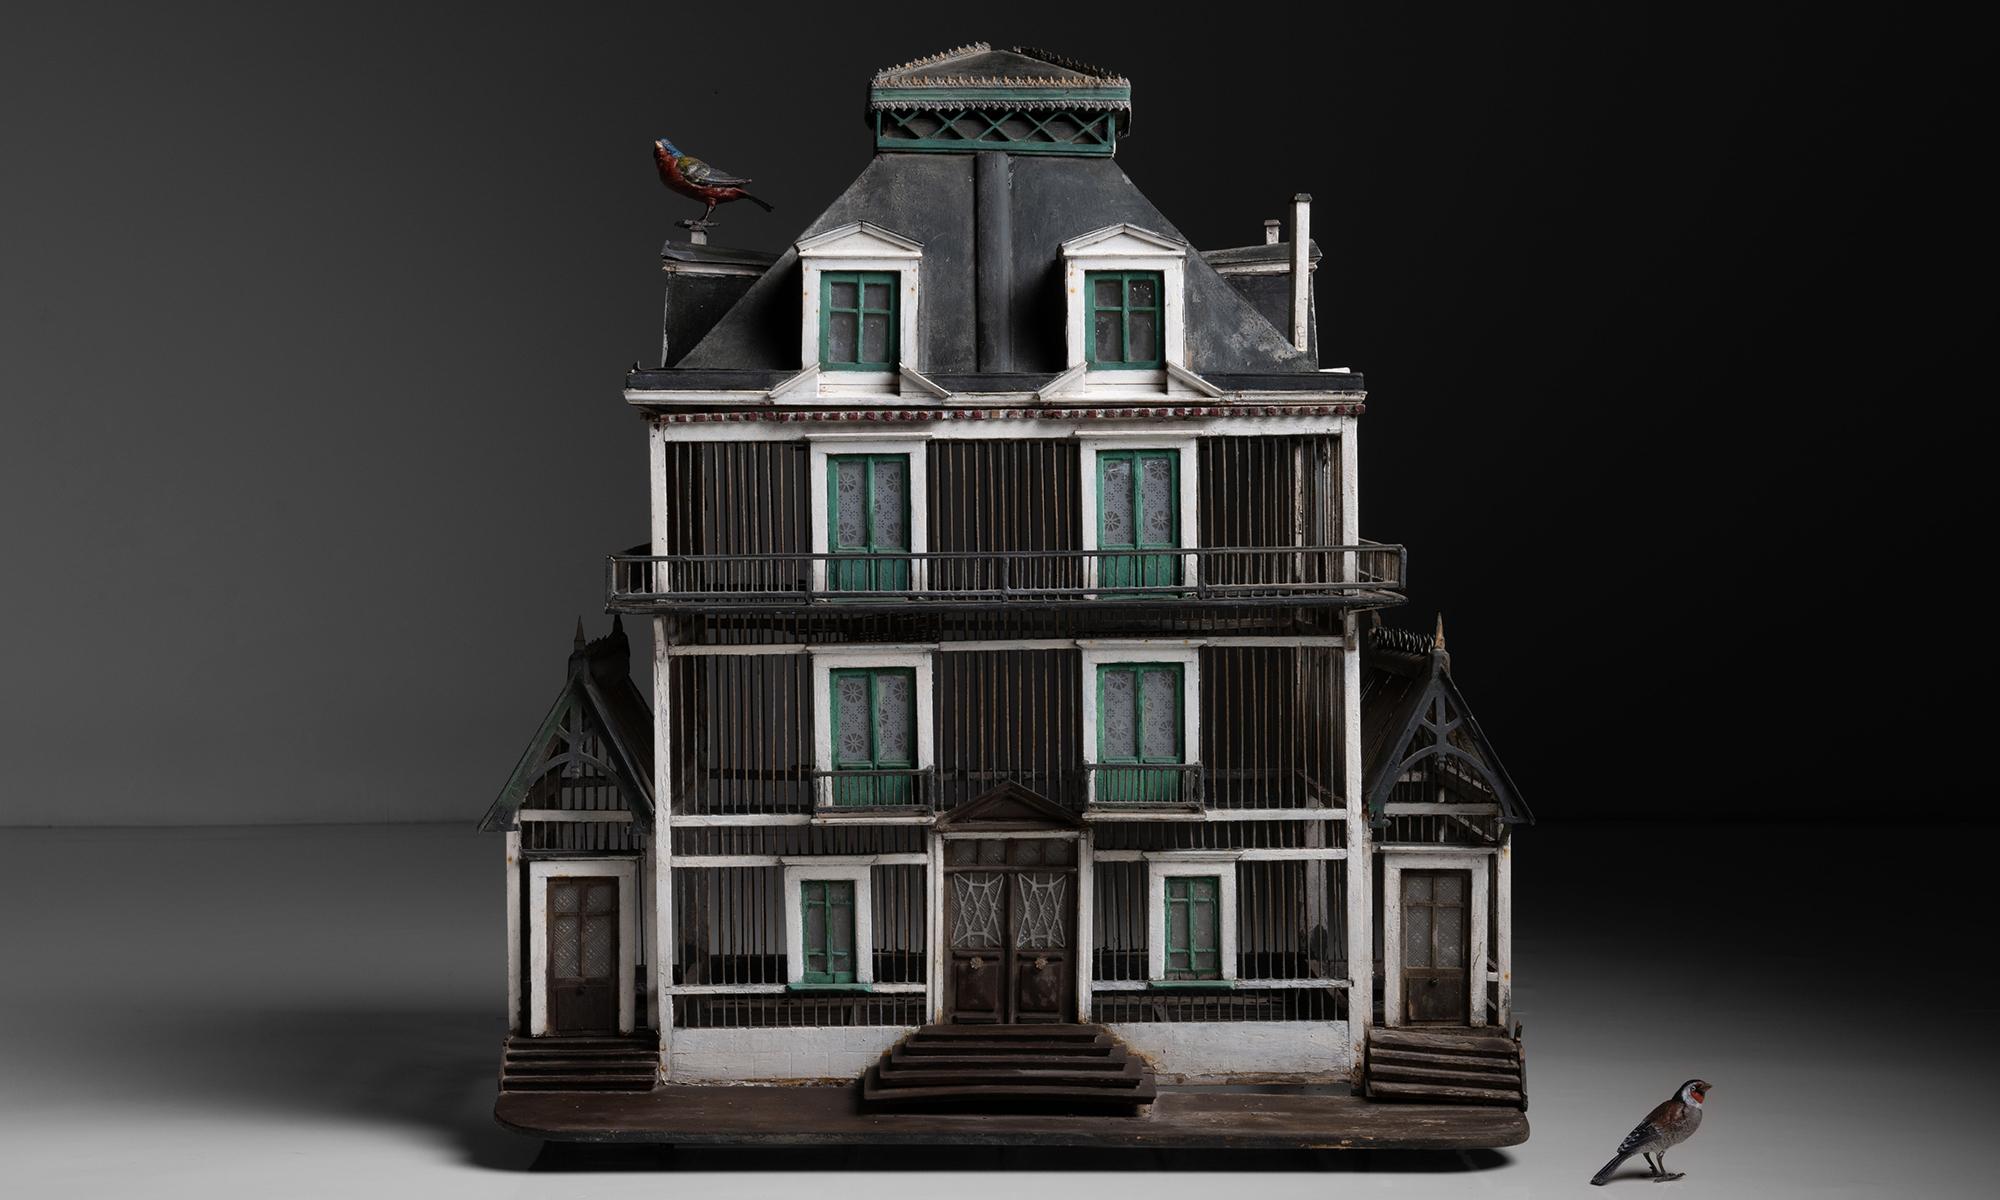 4 Story Bird Cage

France, circa 1860

Incredible birdcage with glass windows, door, balconies and porticoes.

Measures 31.5”w x 22.5”d x 36”h